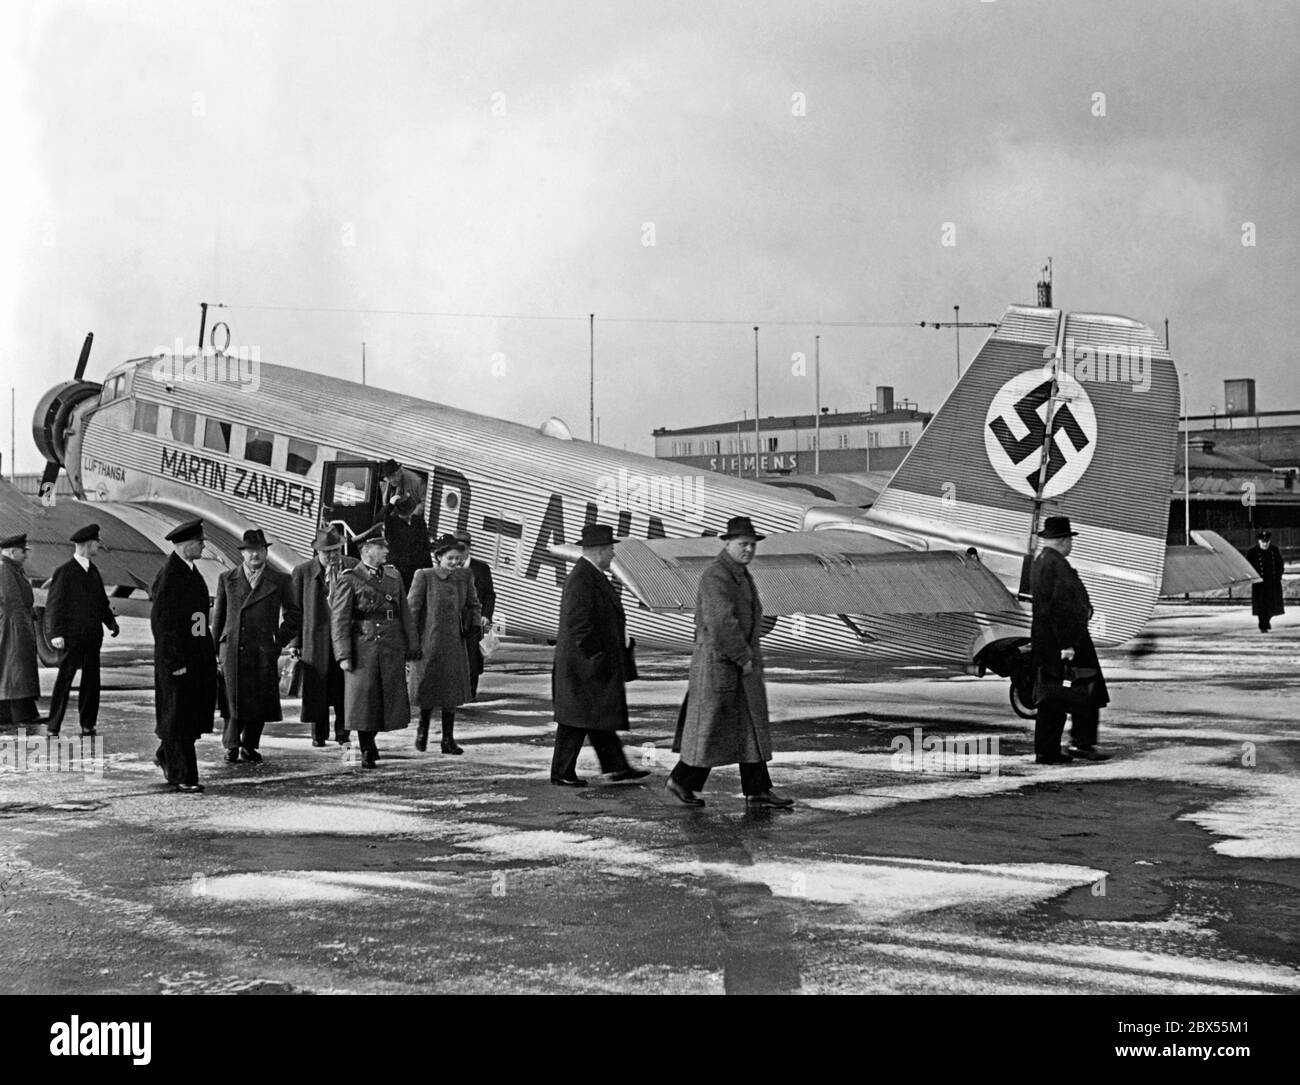 The Junkers Ju 52/3m Martin Zander of Lufthansa after its arrival from Vienna at Berlin Tempelhof Airport. The airport had just taken over flight operations from Rangsdorf Airport. Stock Photo